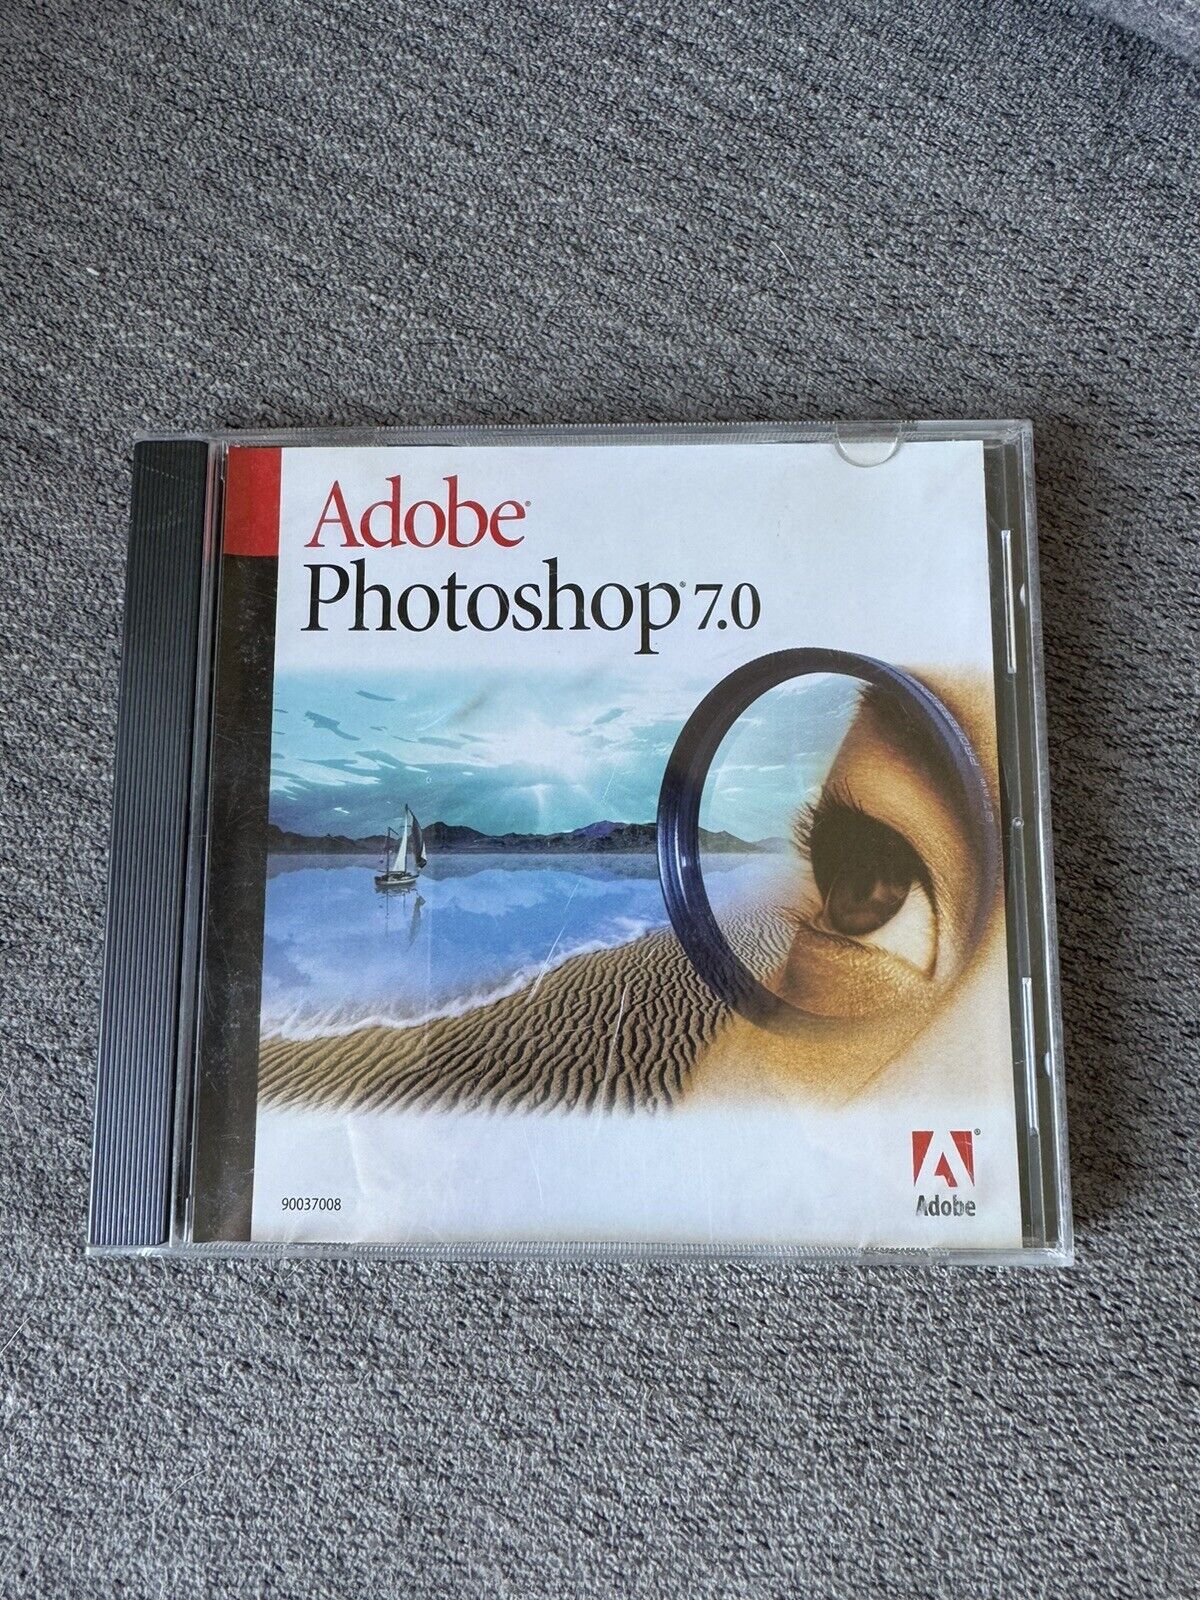 Adobe Photoshop 7.0 Upgrade for Windows  CD and Serial Number